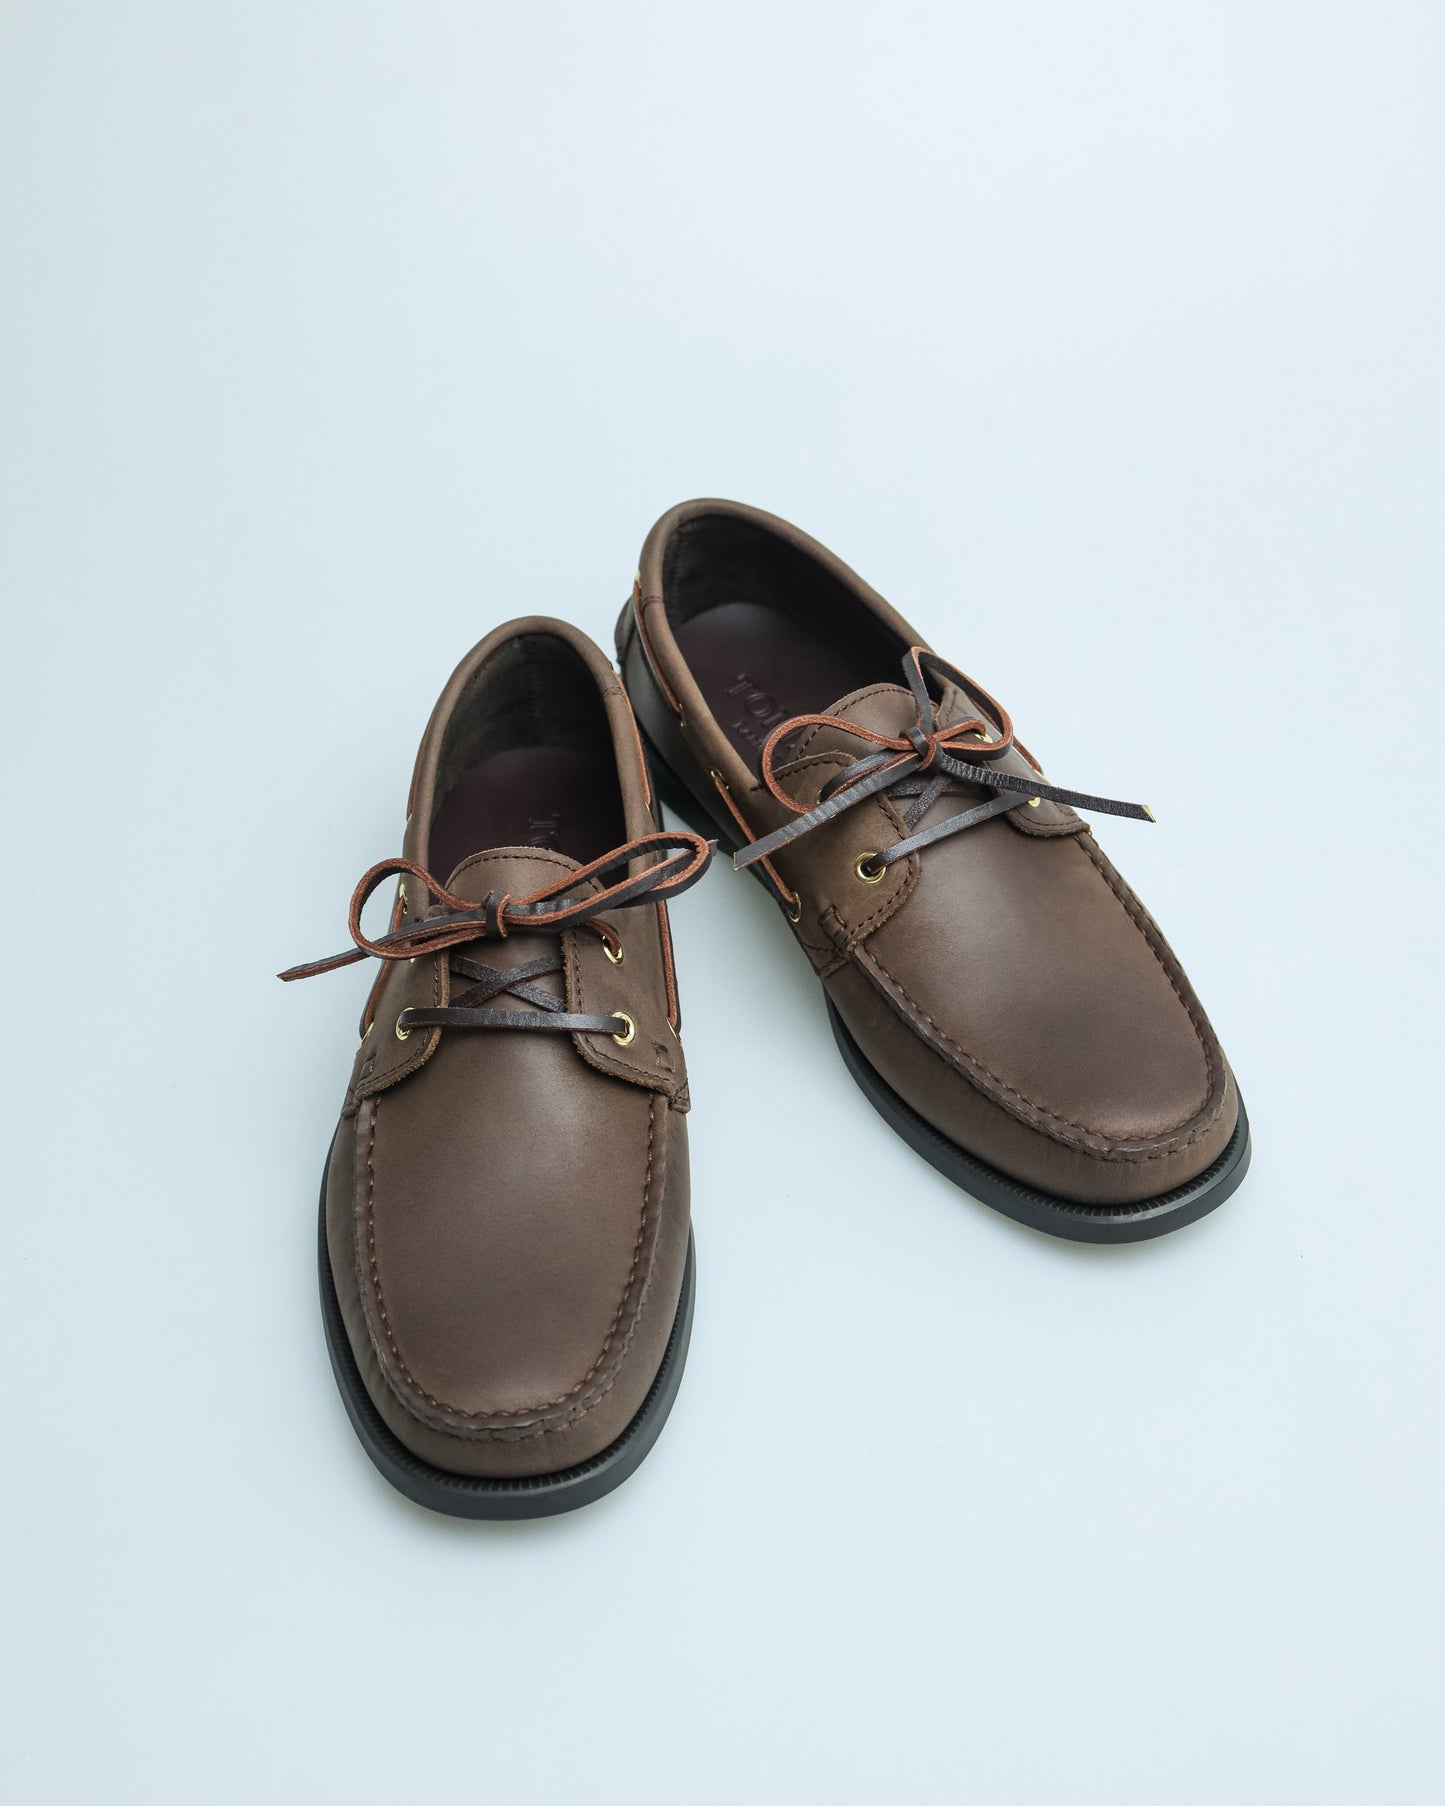 Tomaz C328A Men's Leather Boat Shoes (Coffee)